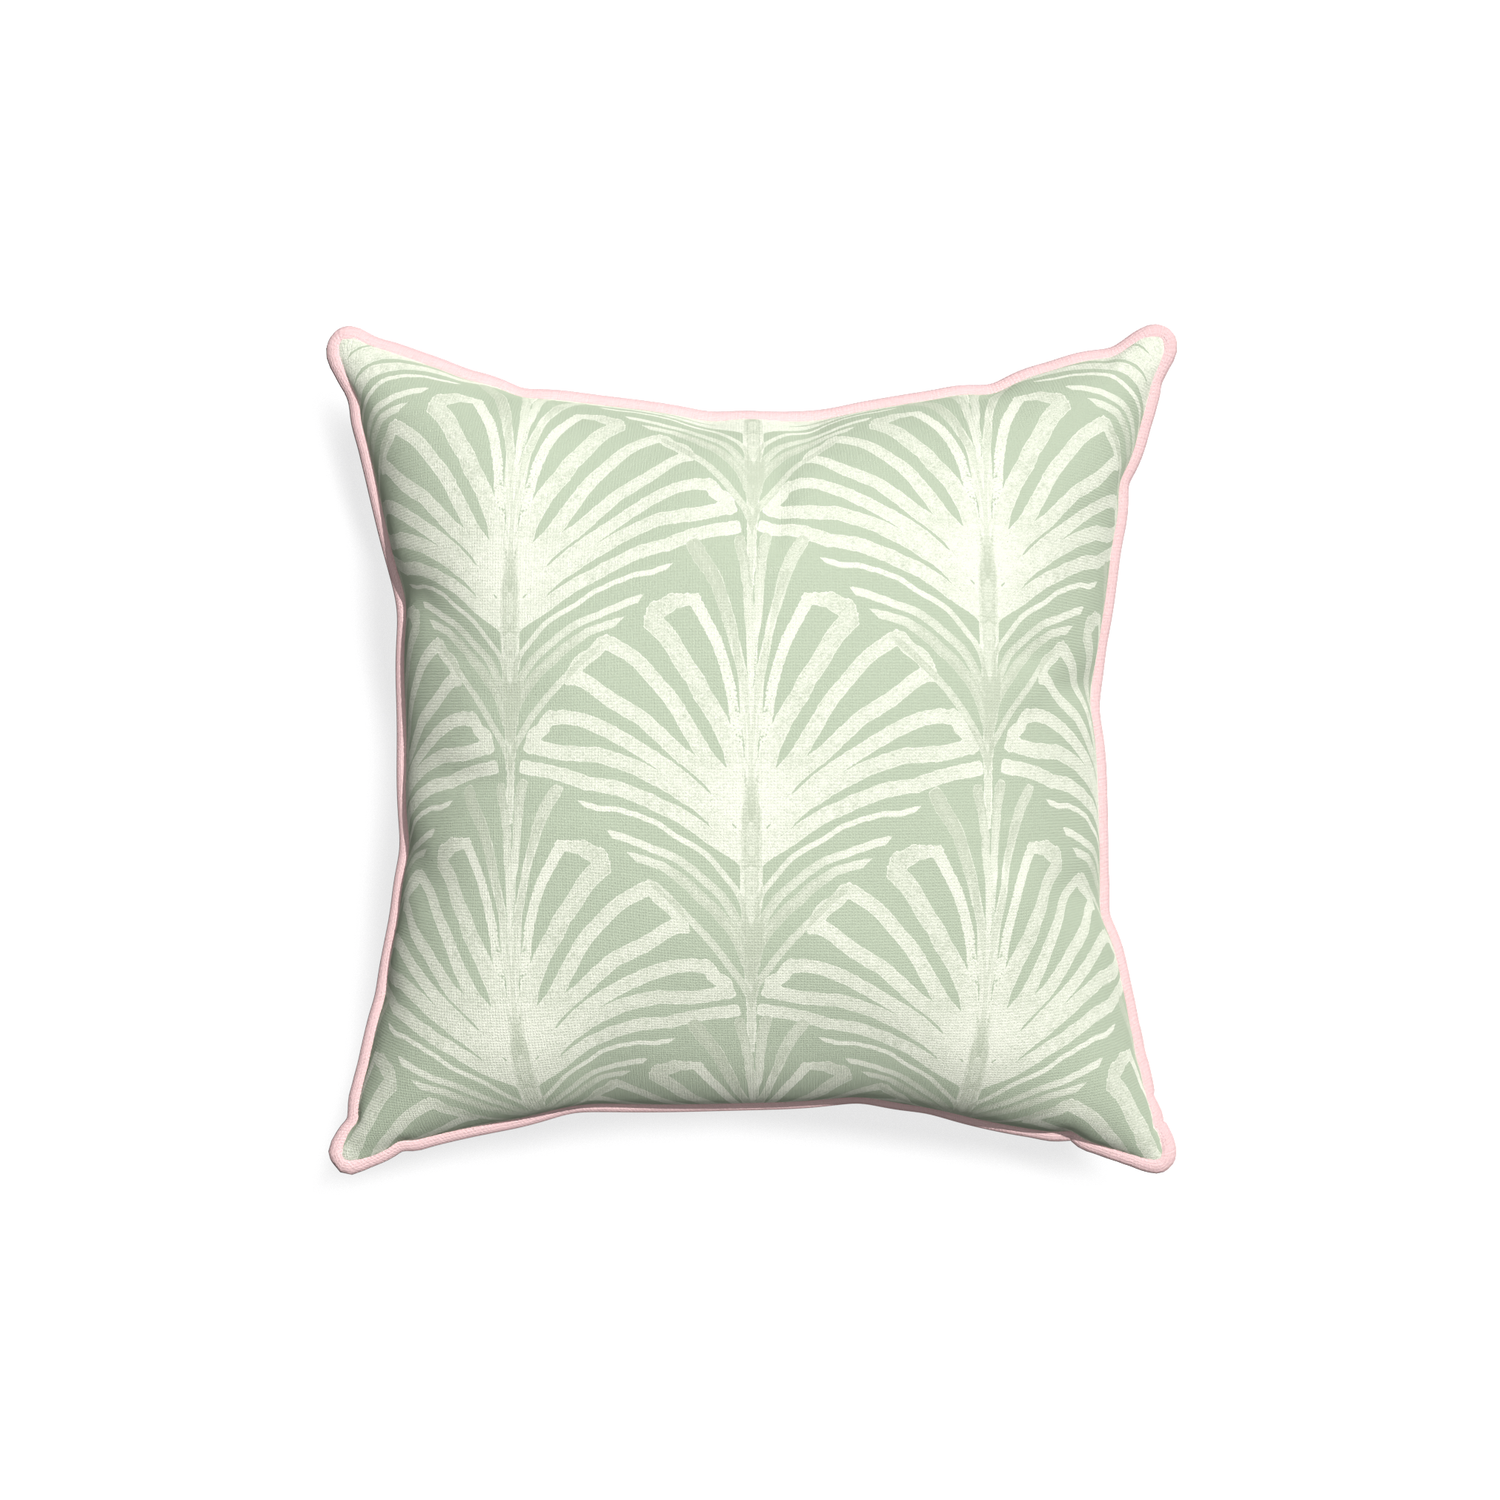 18-square suzy sage custom pillow with petal piping on white background